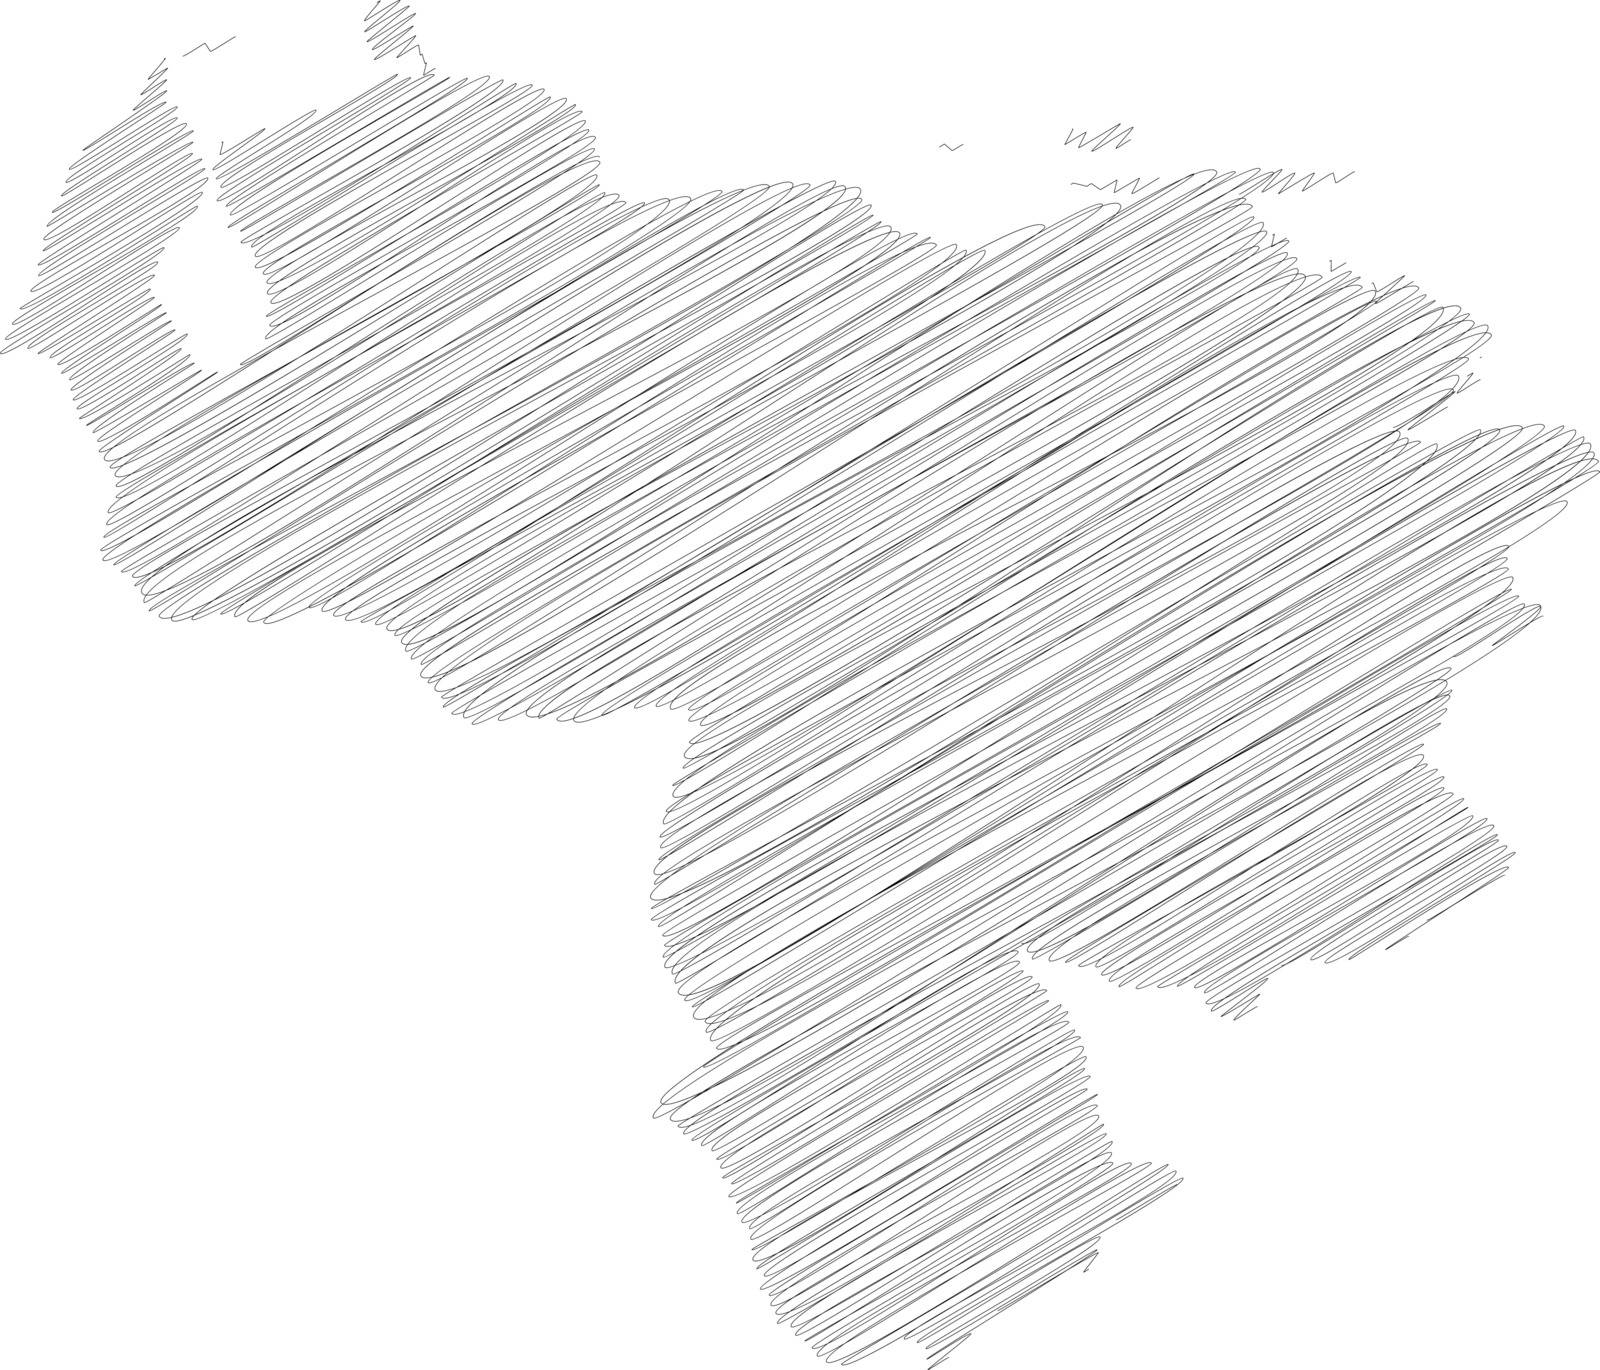 Venezuela - pencil scribble sketch silhouette map of country area with dropped shadow. Simple flat vector illustration.